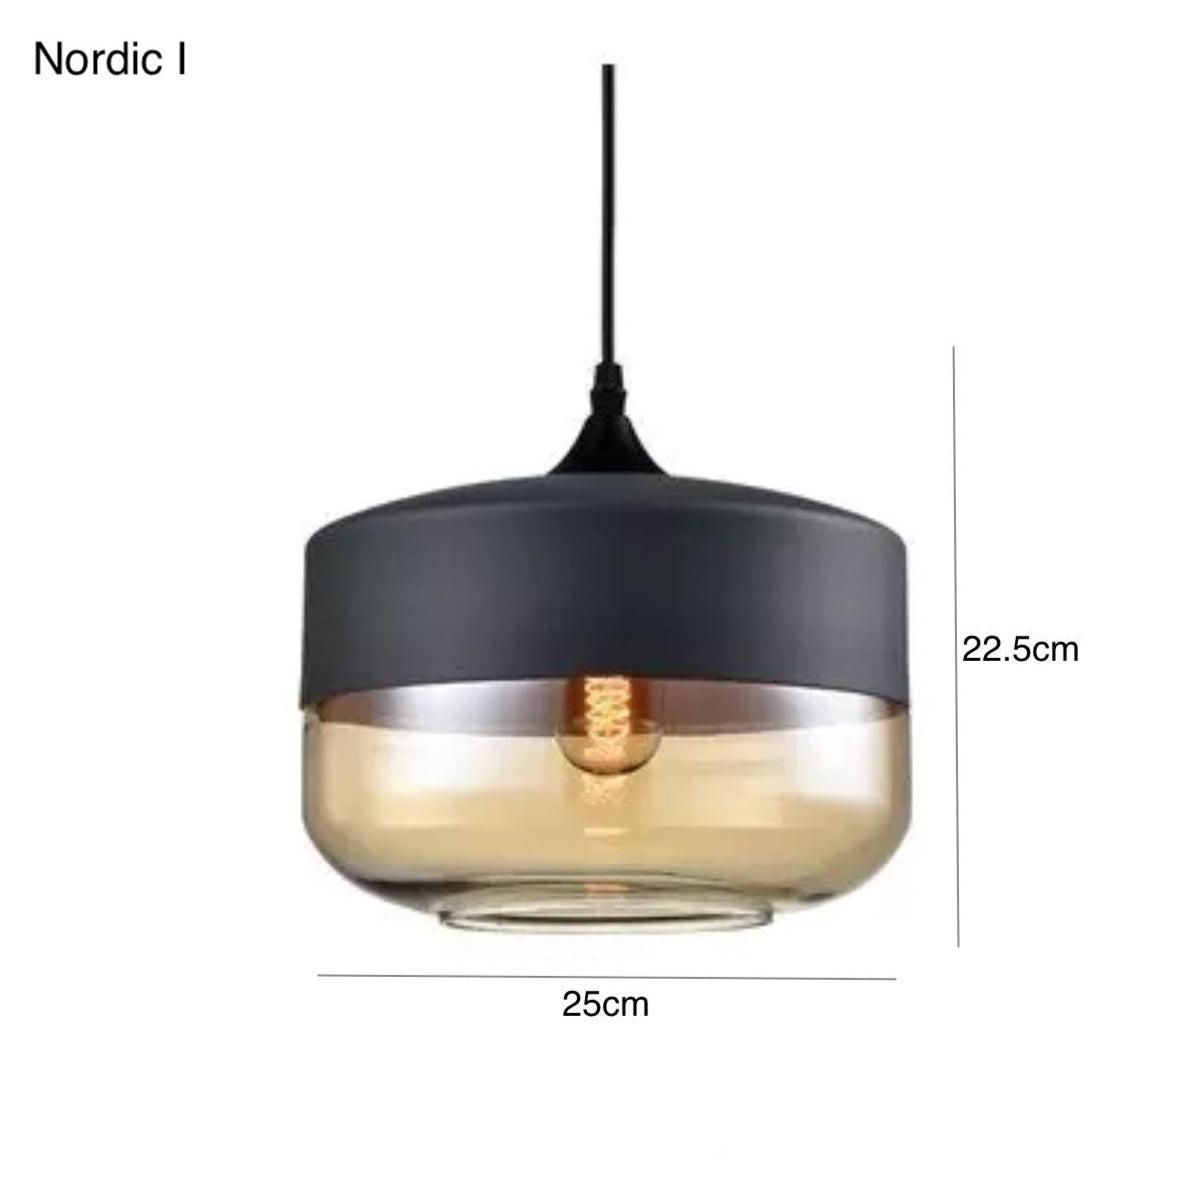 NORDIC Collection Hestia + Co. NORDIC I Black and Amber 